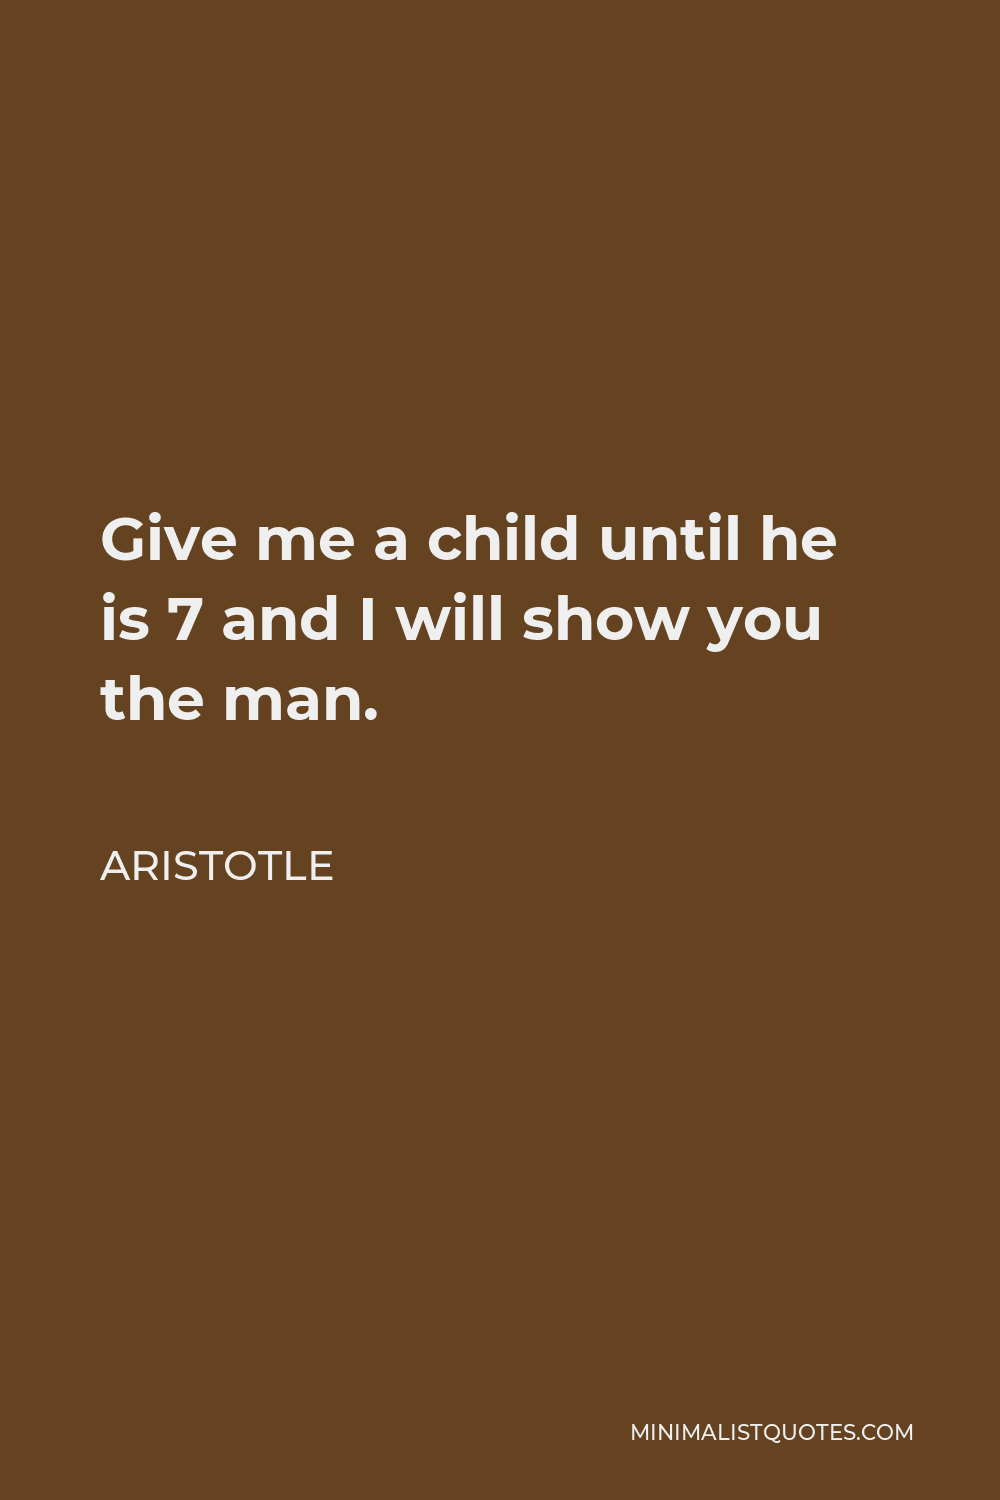 Aristotle Quote - Give me a child until he is 7 and I will show you the man.